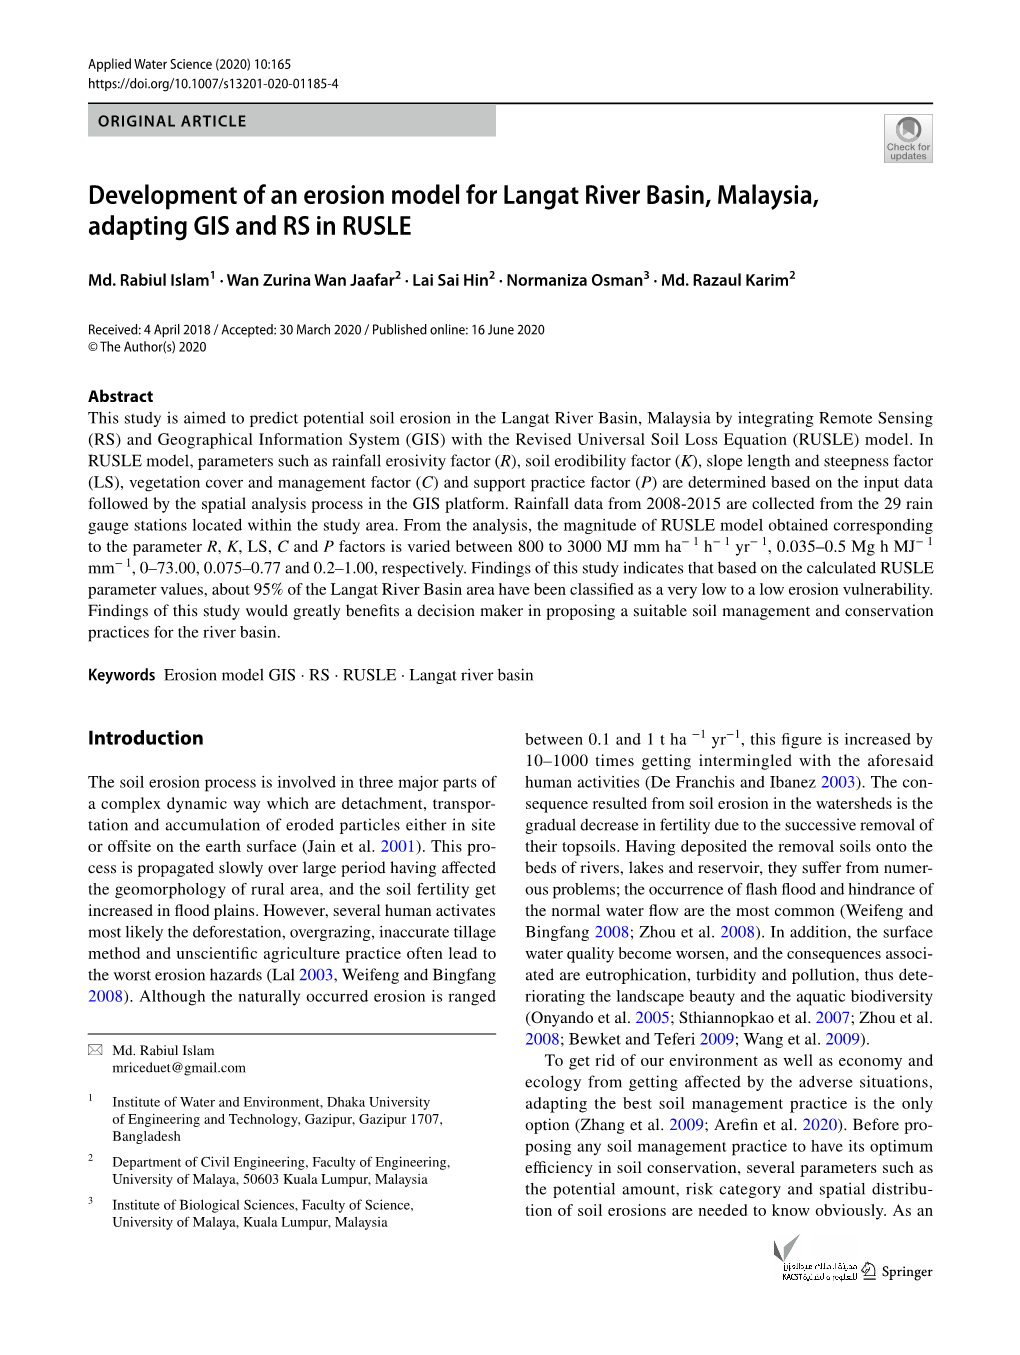 Development of an Erosion Model for Langat River Basin, Malaysia, Adapting GIS and RS in RUSLE